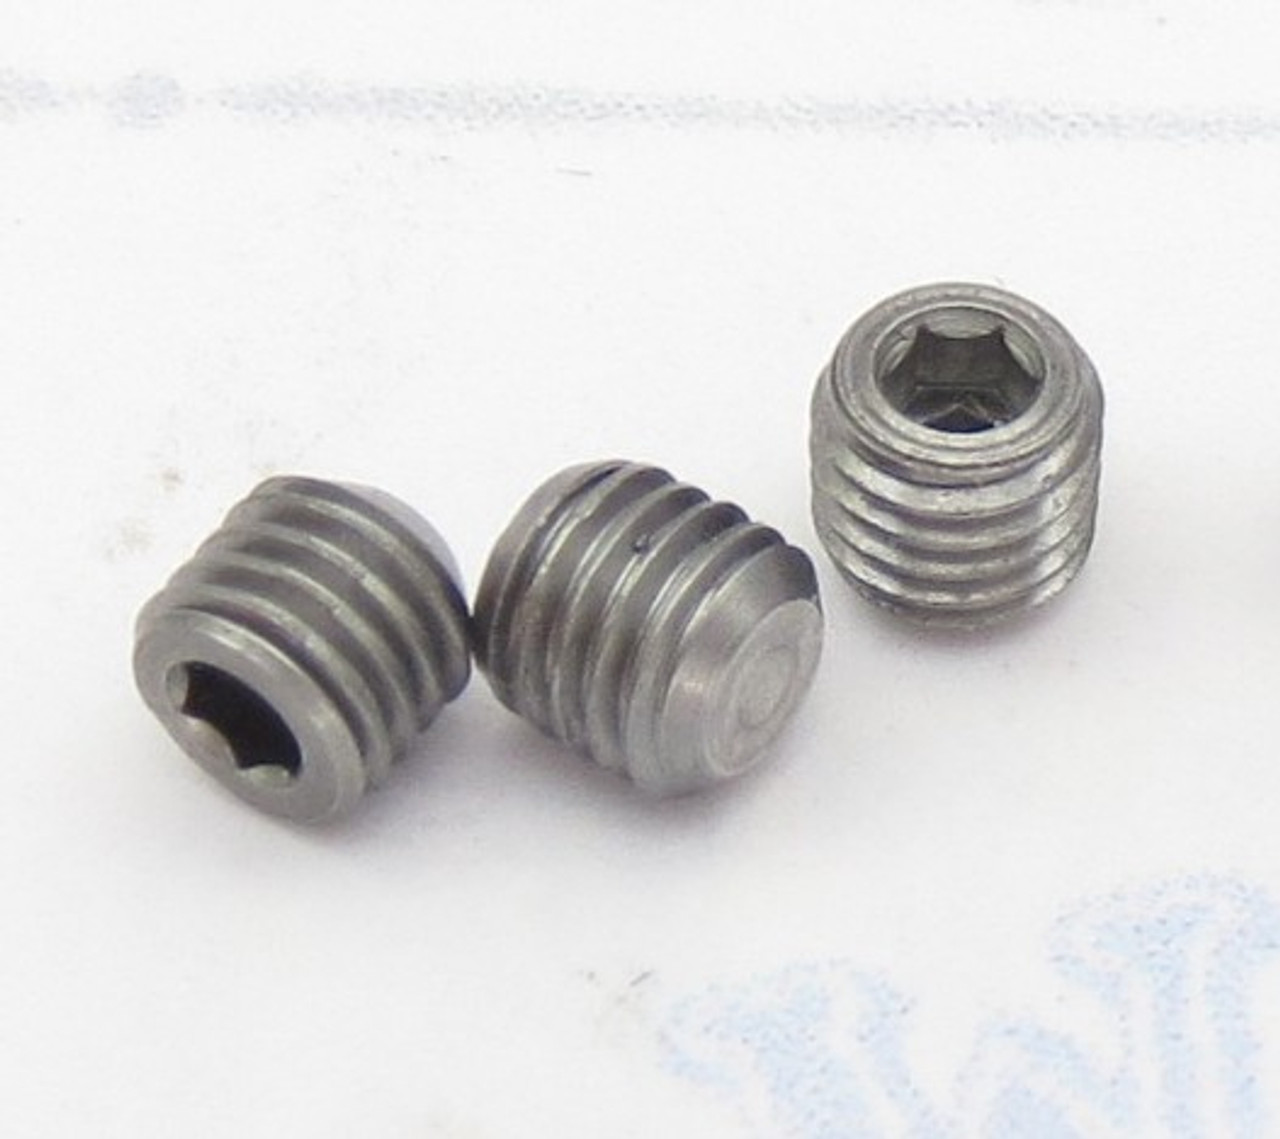 Ruger STAINLESS Scope Base Filler HEX Allen Screws for Mark 1 2 3 4 IV & All 22/45 with Factory Drilled Holes